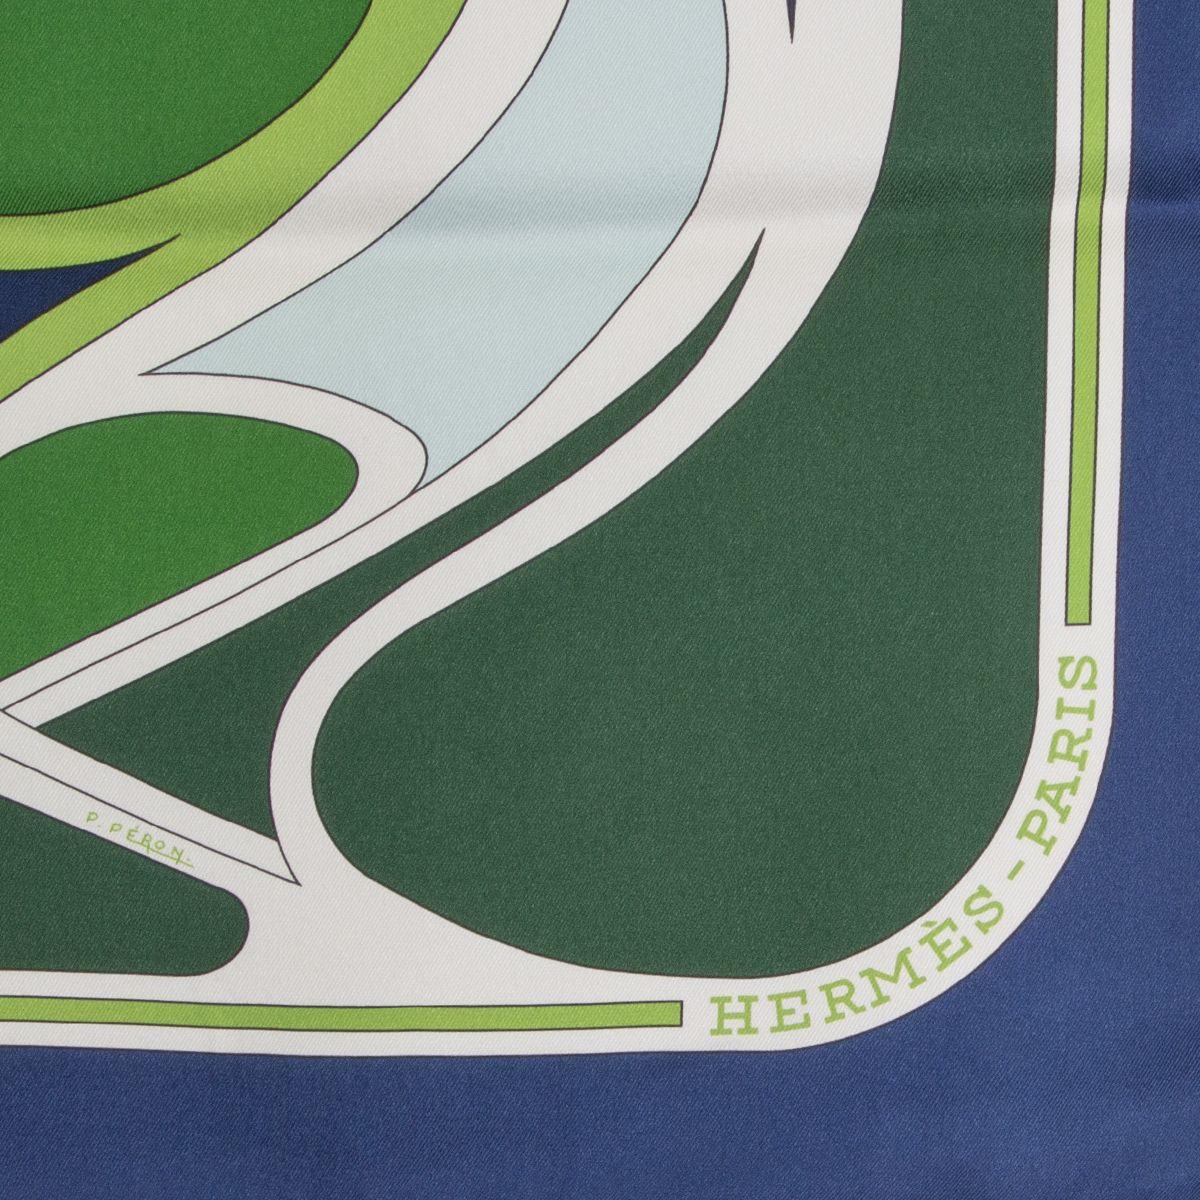 authentic Hermes 'Virages 70' scarf by Pierre Peron in dark blue vintage silk (100%) with details in white and various shades of green. Has been worn and is in excellent condition.

Width 70cm (27.3in)
Height 70cm (27.3in)